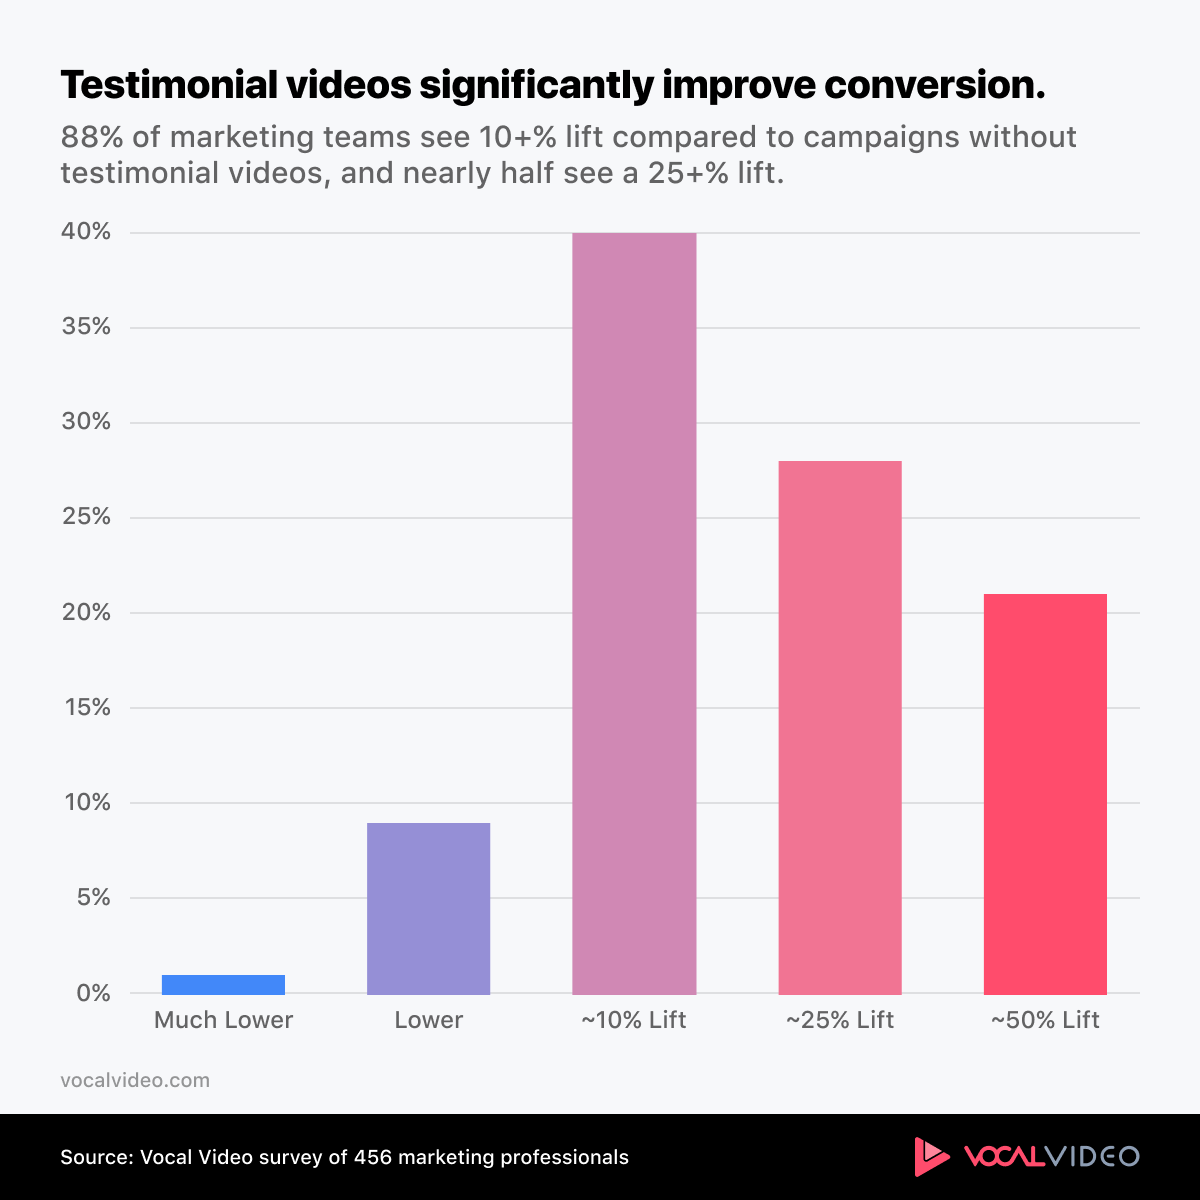 Chart showing that testimonial videos significantly improve conversion.